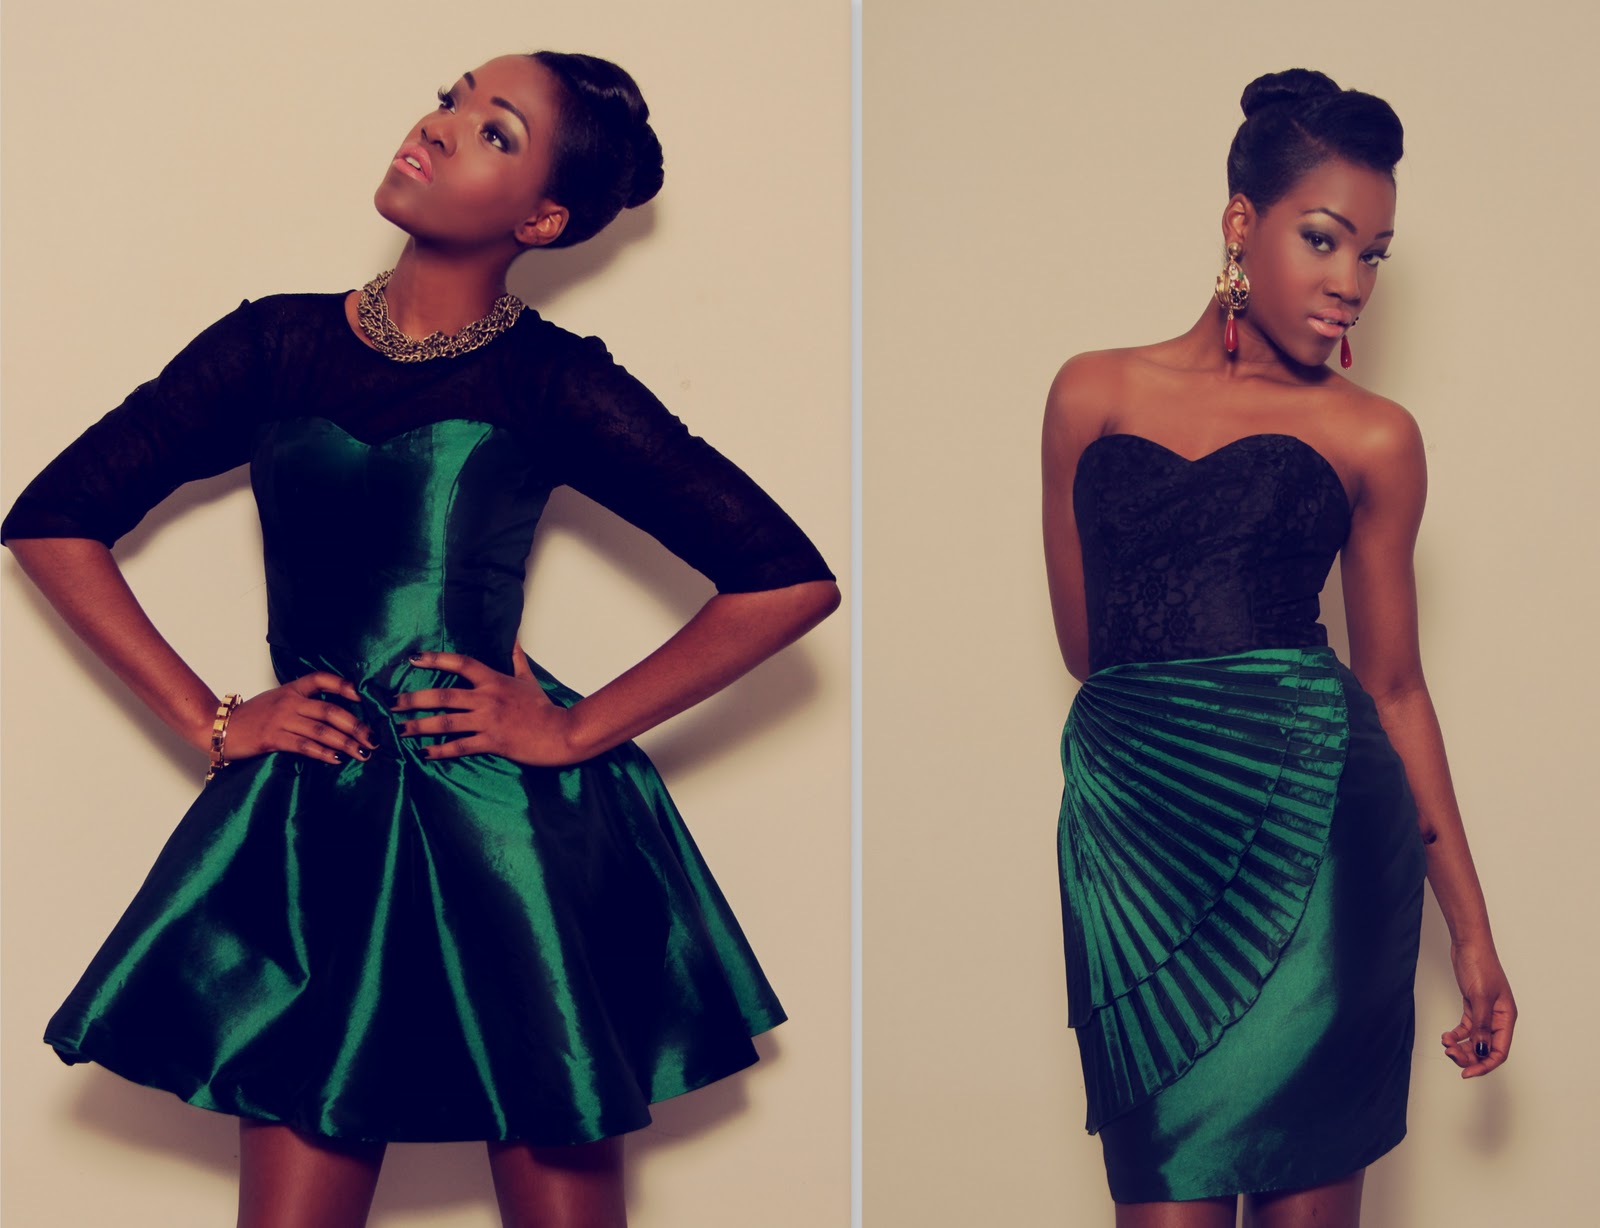 CIAAFRIQUE ™ | AFRICAN FASHION-BEAUTY-STYLE: April 2011